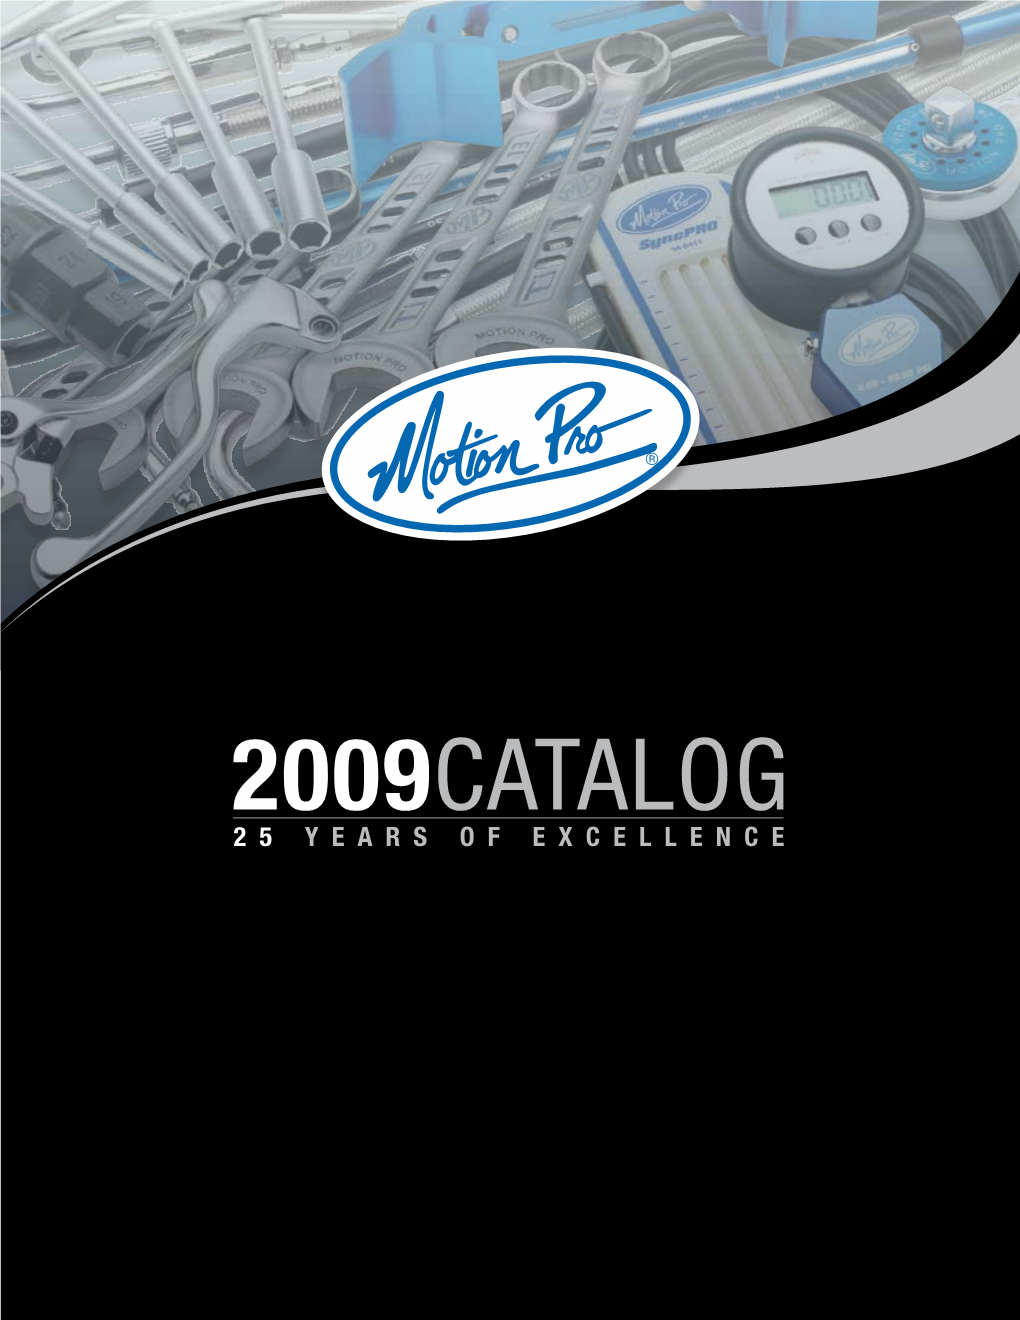 2009CATALOG 25 Y E a R S O F E X C E L L E N C E Buying Motion Pro Means That You Appreciate Quality, Performance and Value